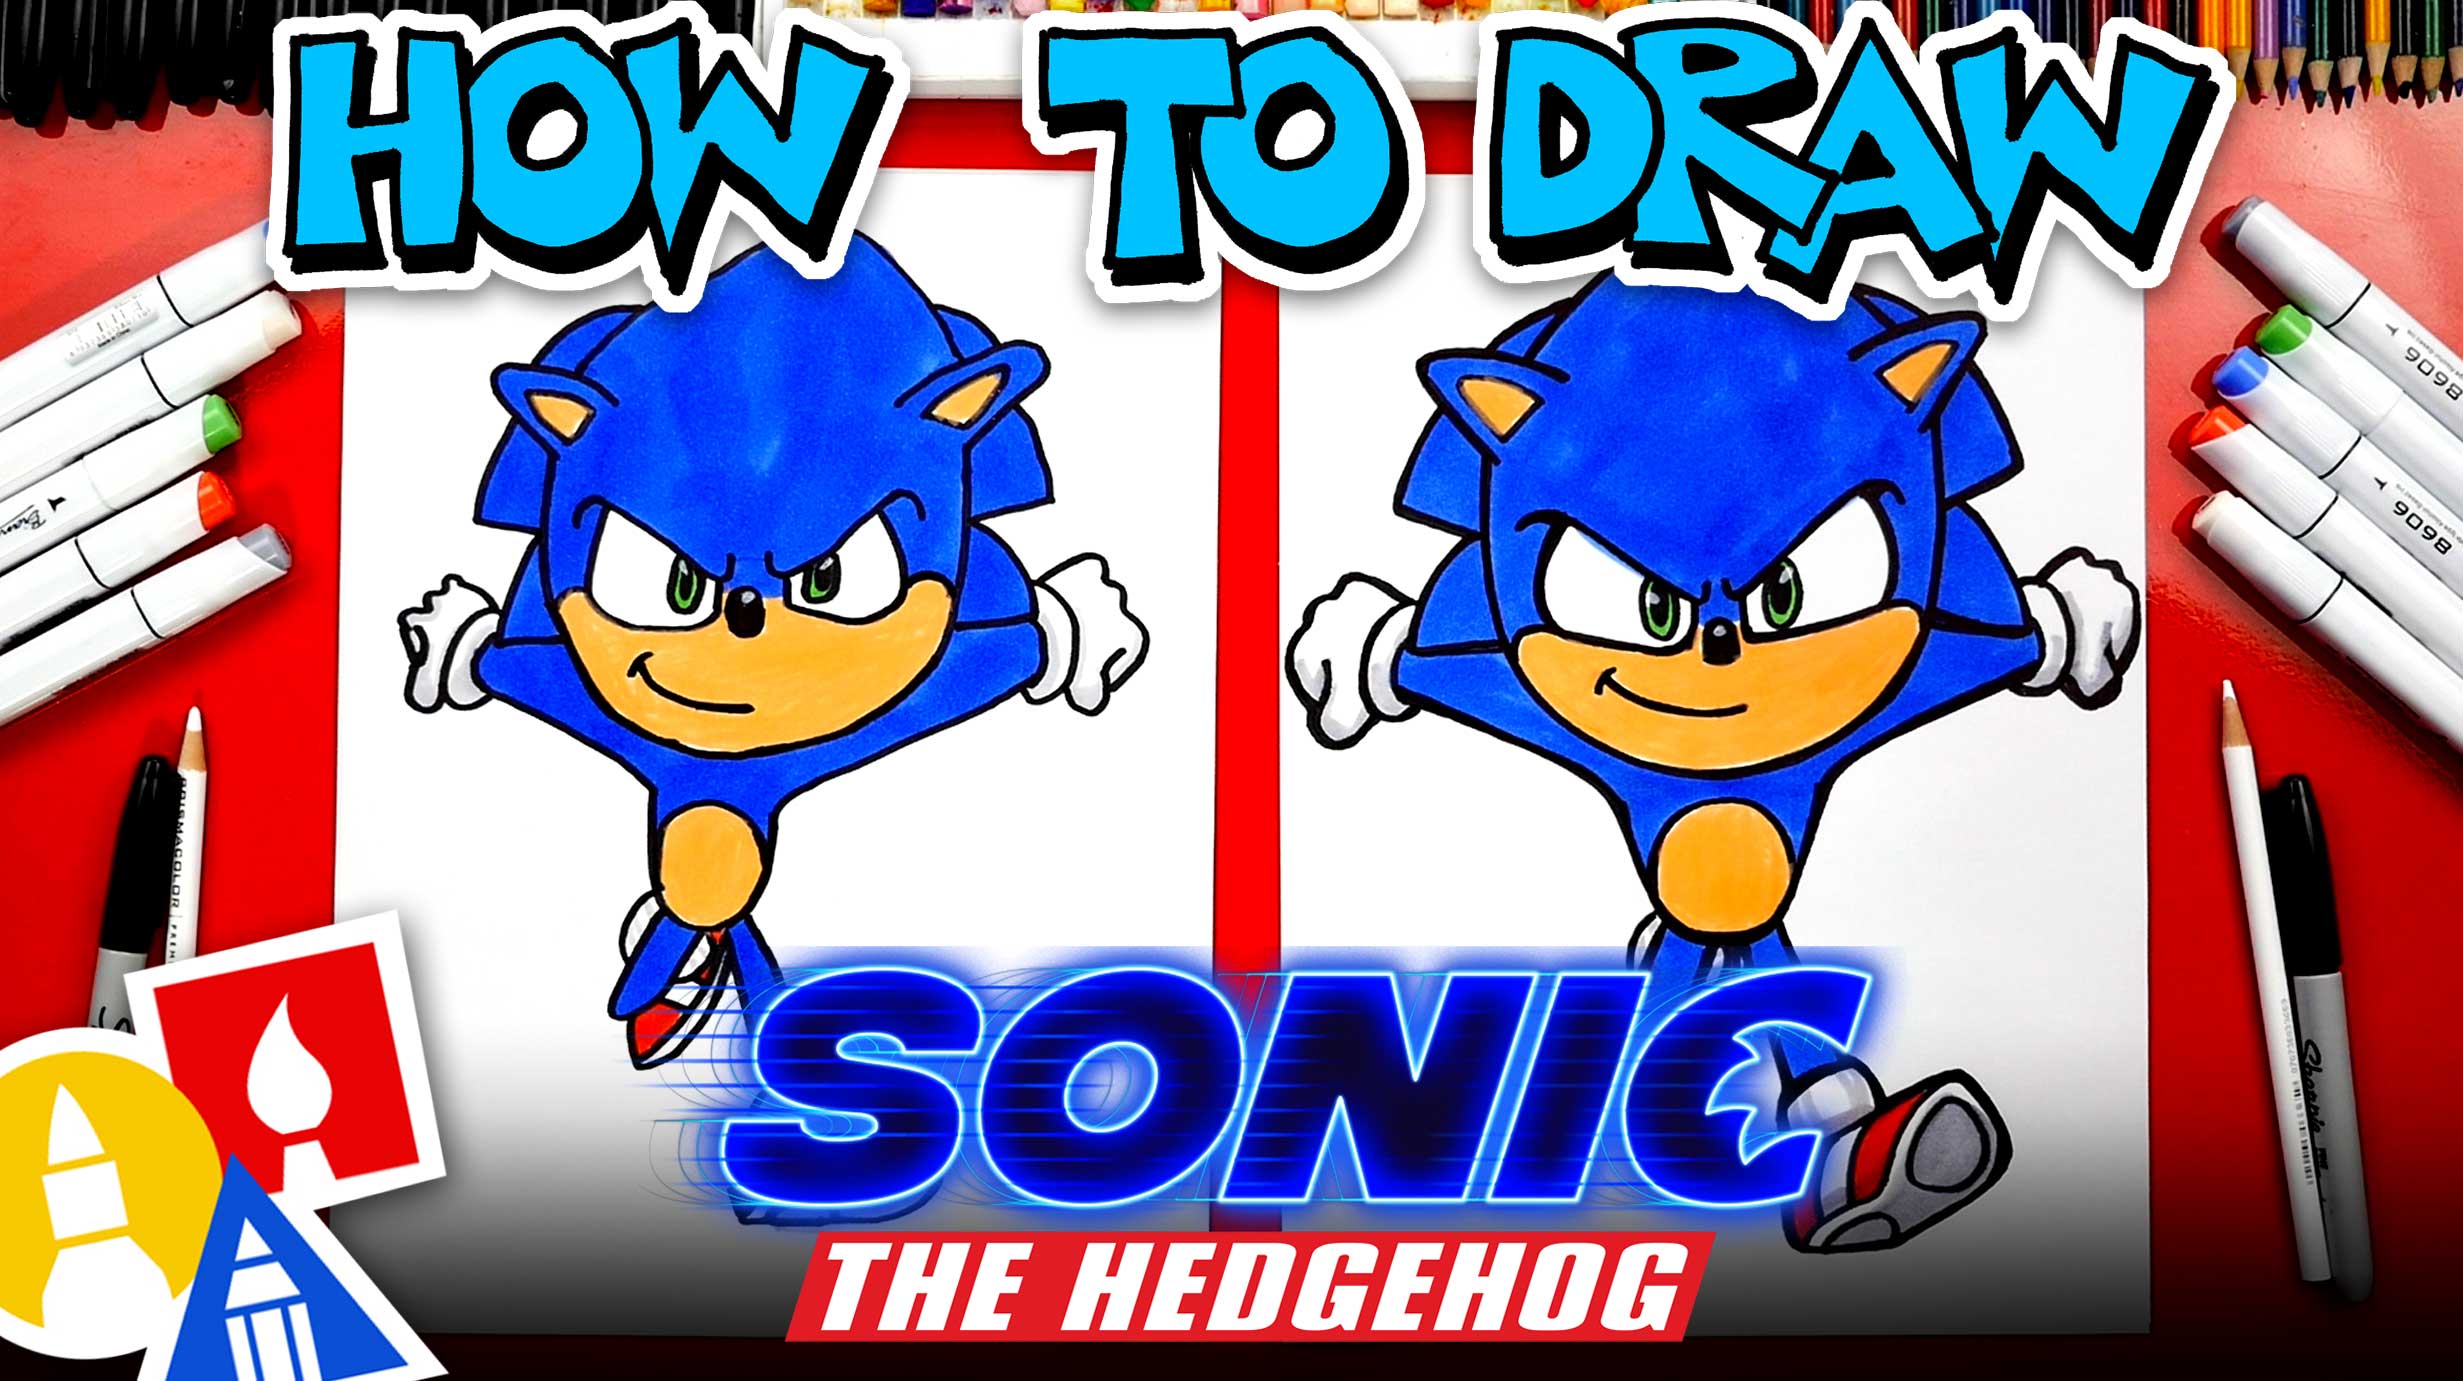 How To Draw Sonic From Sonic The Hedgehog Movie - Art For Kids Hub